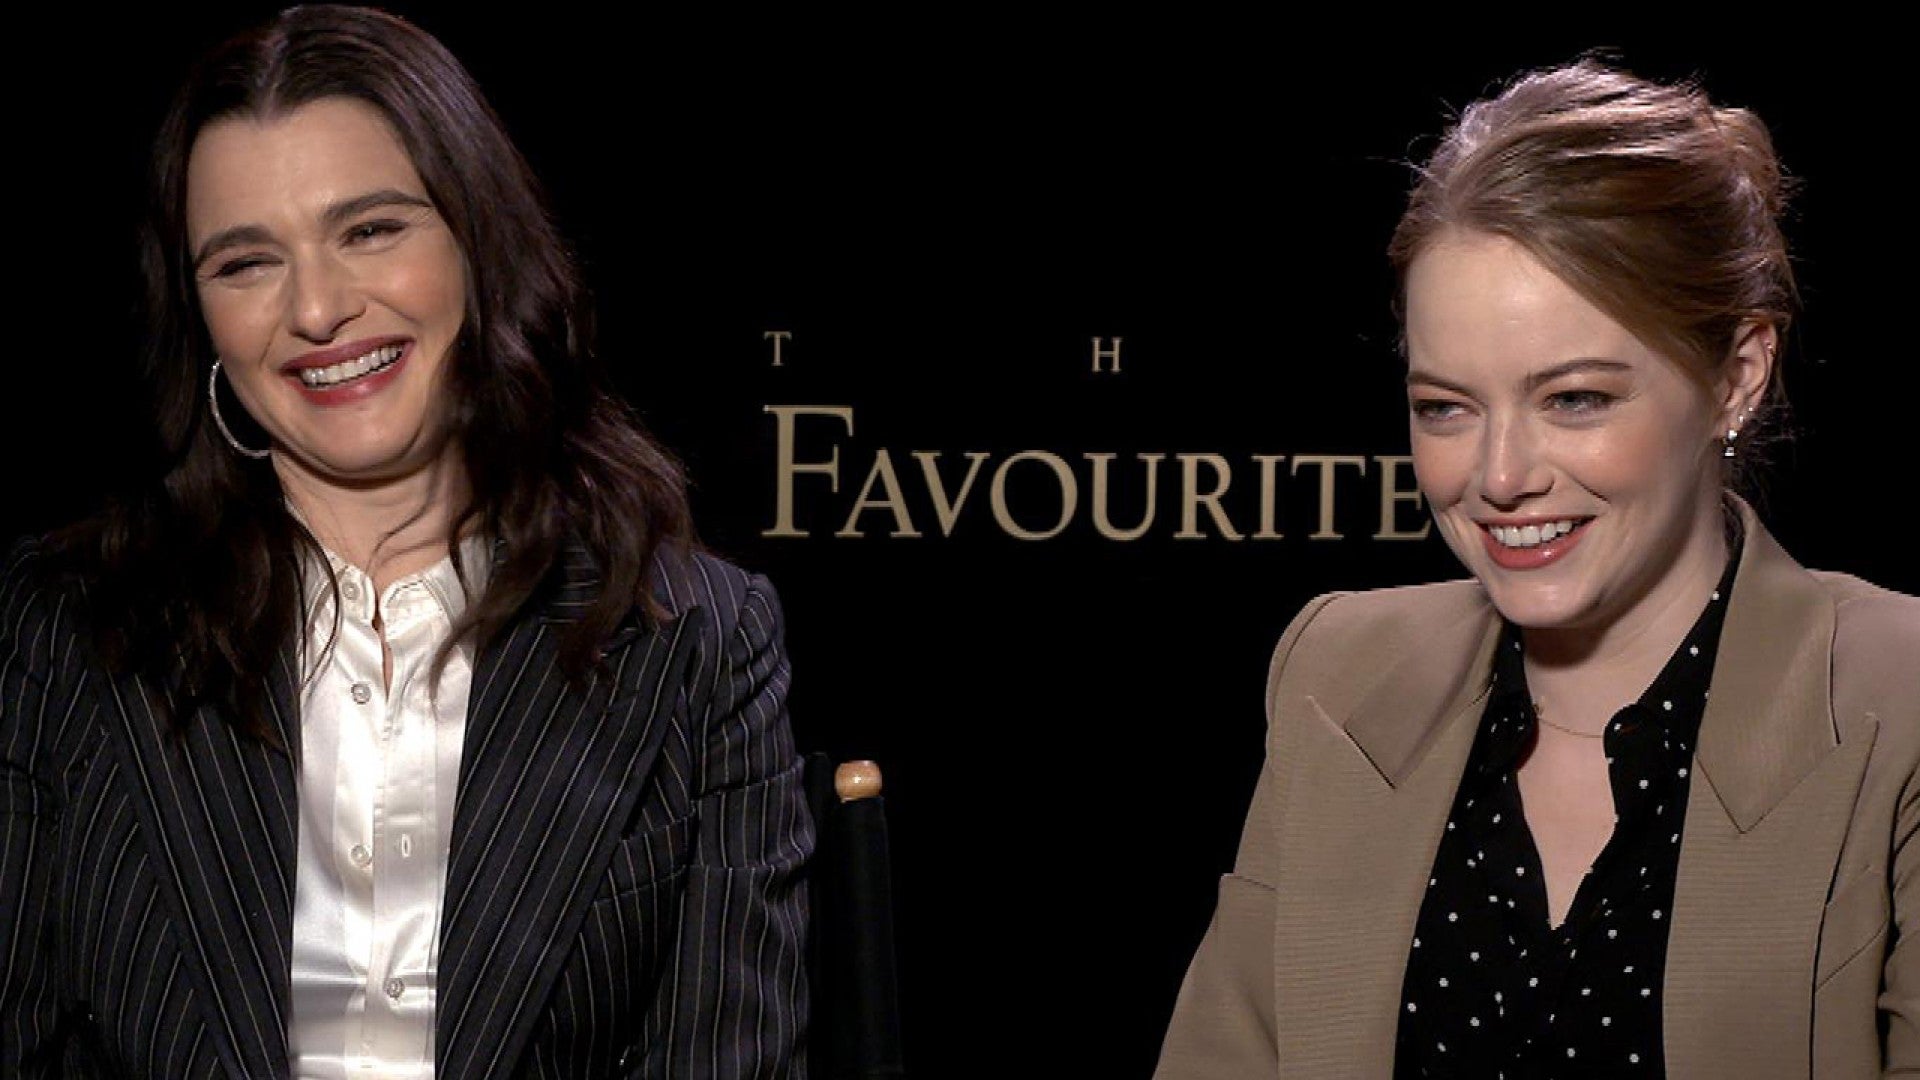 Emma Stone On Her Racy Scene In The Favourite With